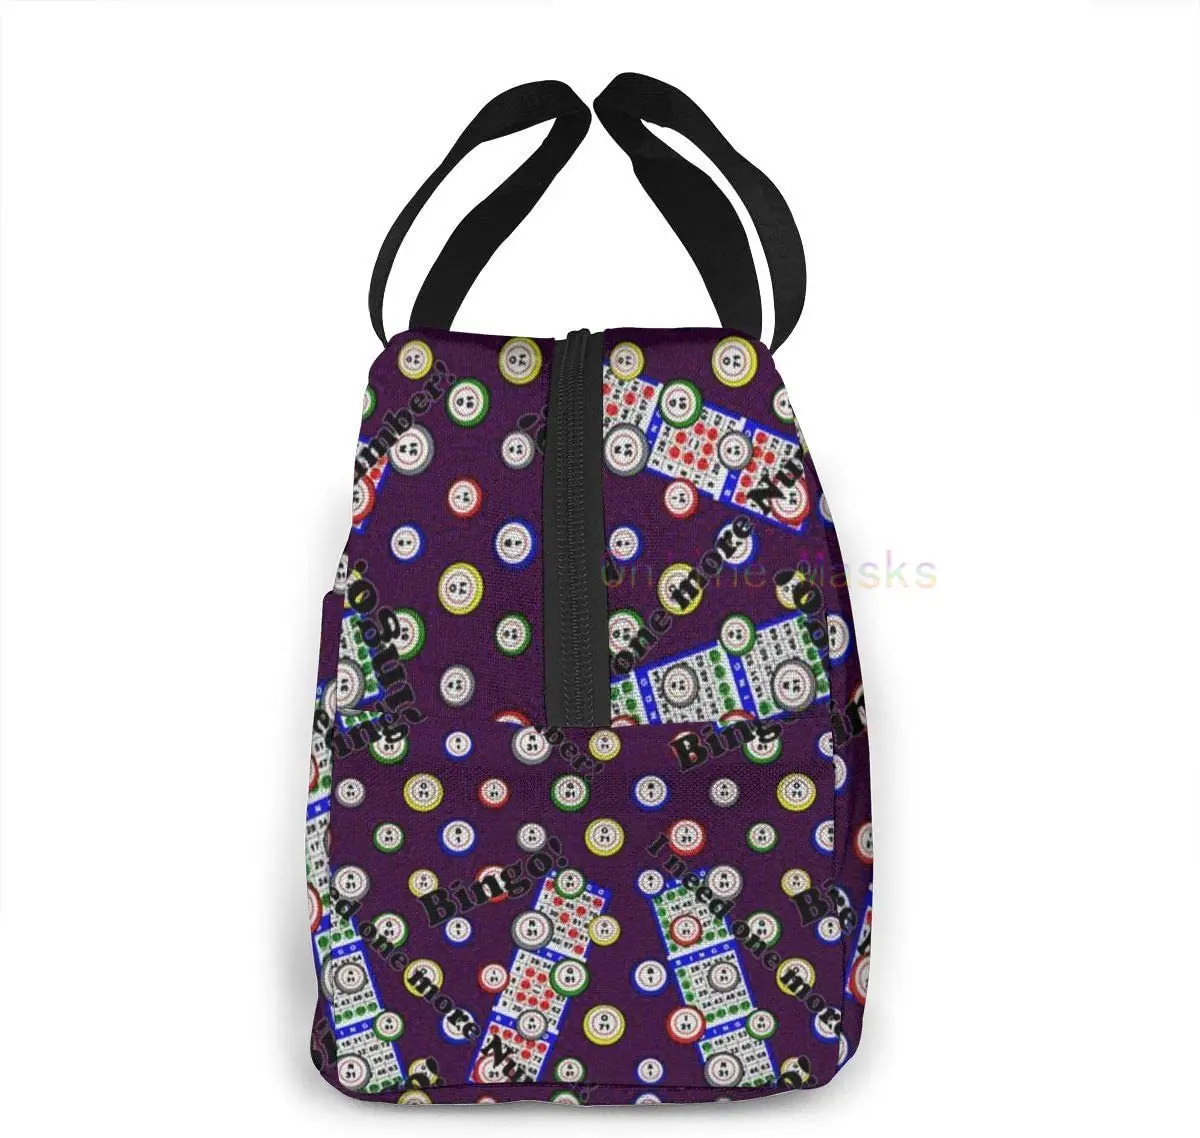 Bingo I Need One More Numbe Lunch Bag Cooler Bag Women Tote Bag Insulated Lunch Box Soft Liner Lunch Container for Picnic Travel